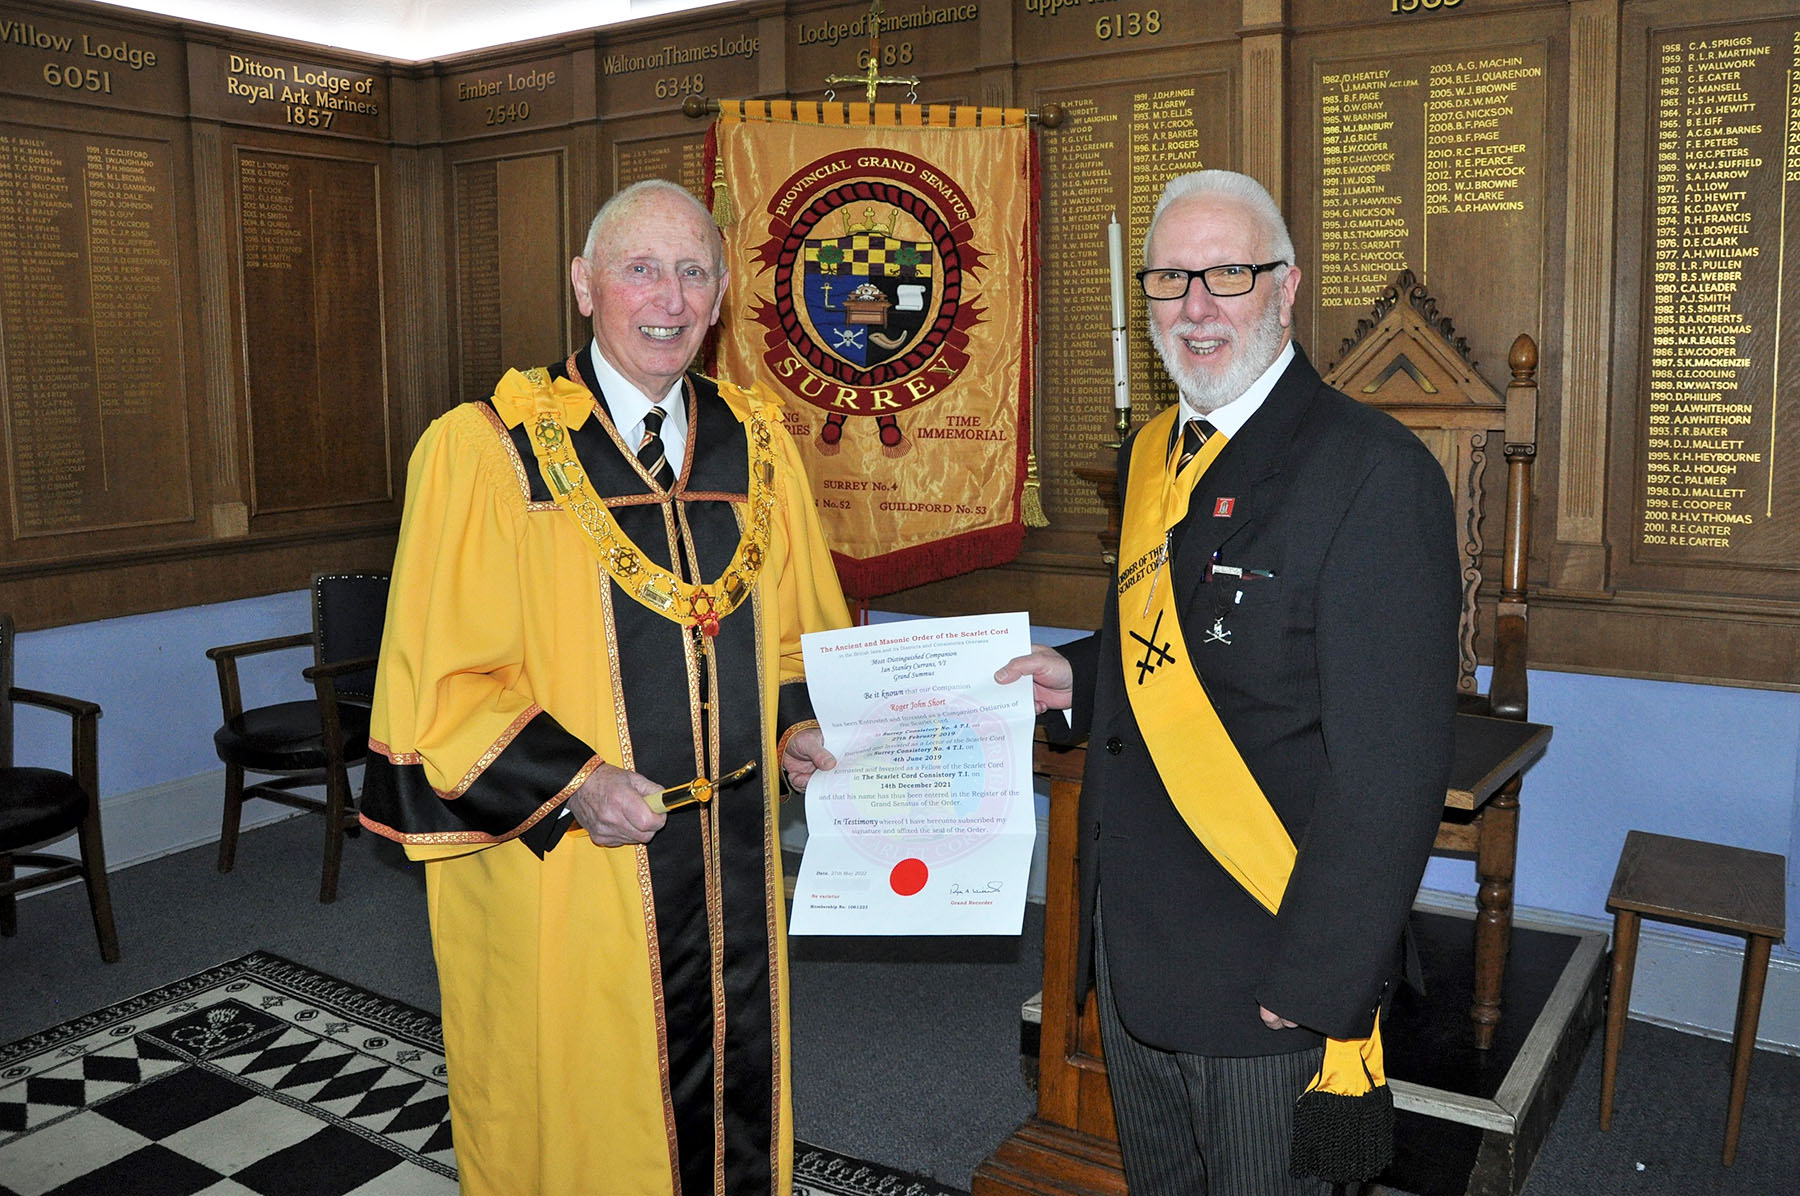 Another Candidate for Surrey Consistory